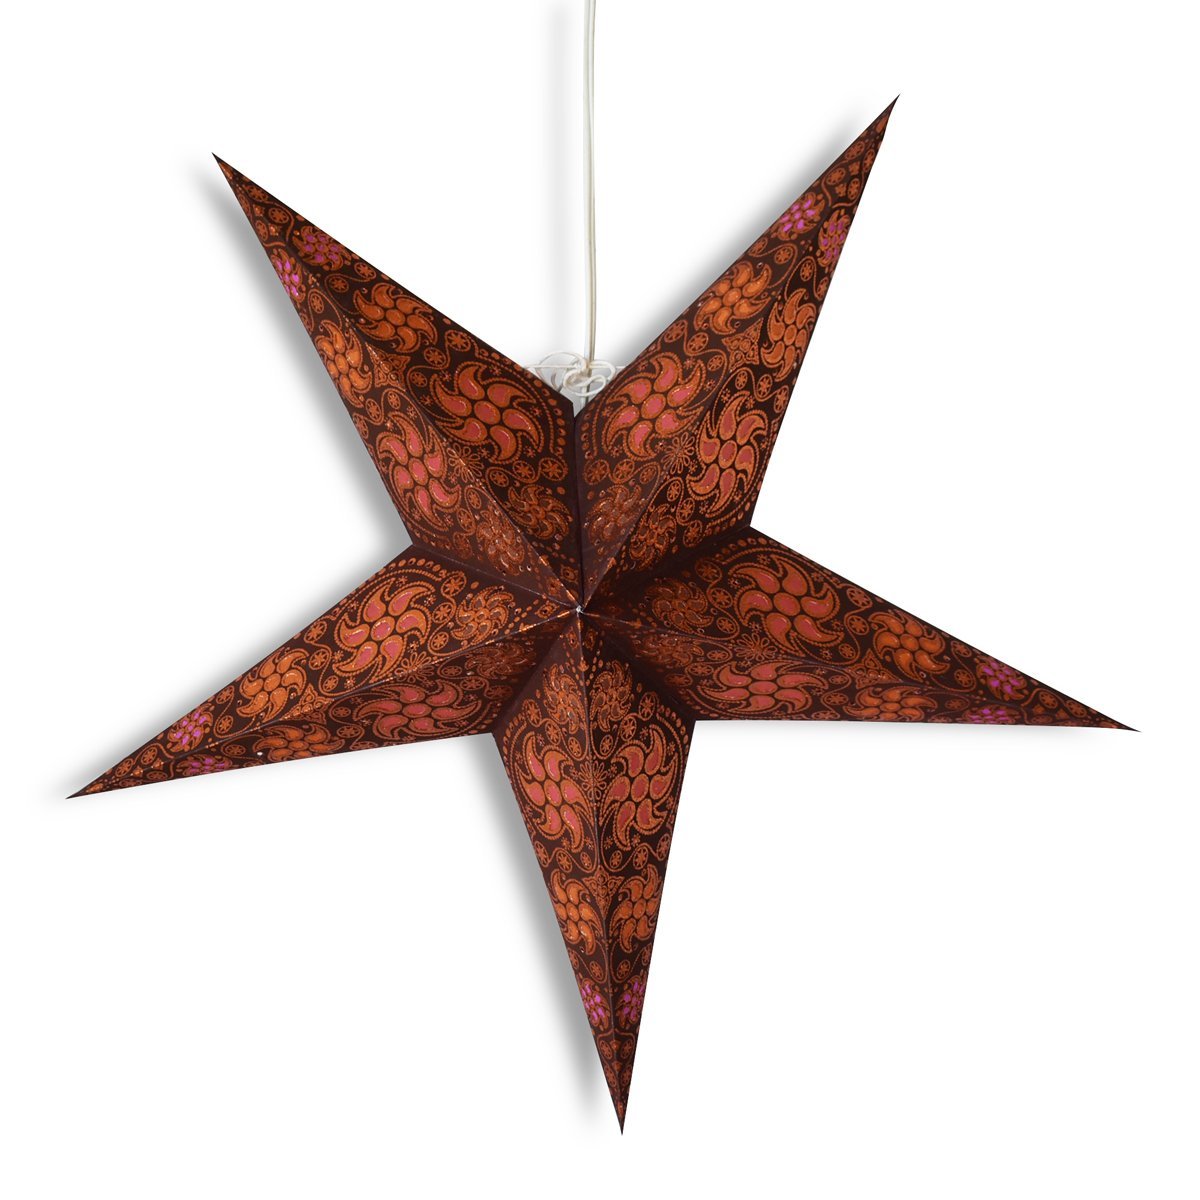 3-PACK + Cord | 24&quot; Brown Winds Glitter Paper Star Lantern and Lamp Cord Hanging Decoration - PaperLanternStore.com - Paper Lanterns, Decor, Party Lights &amp; More